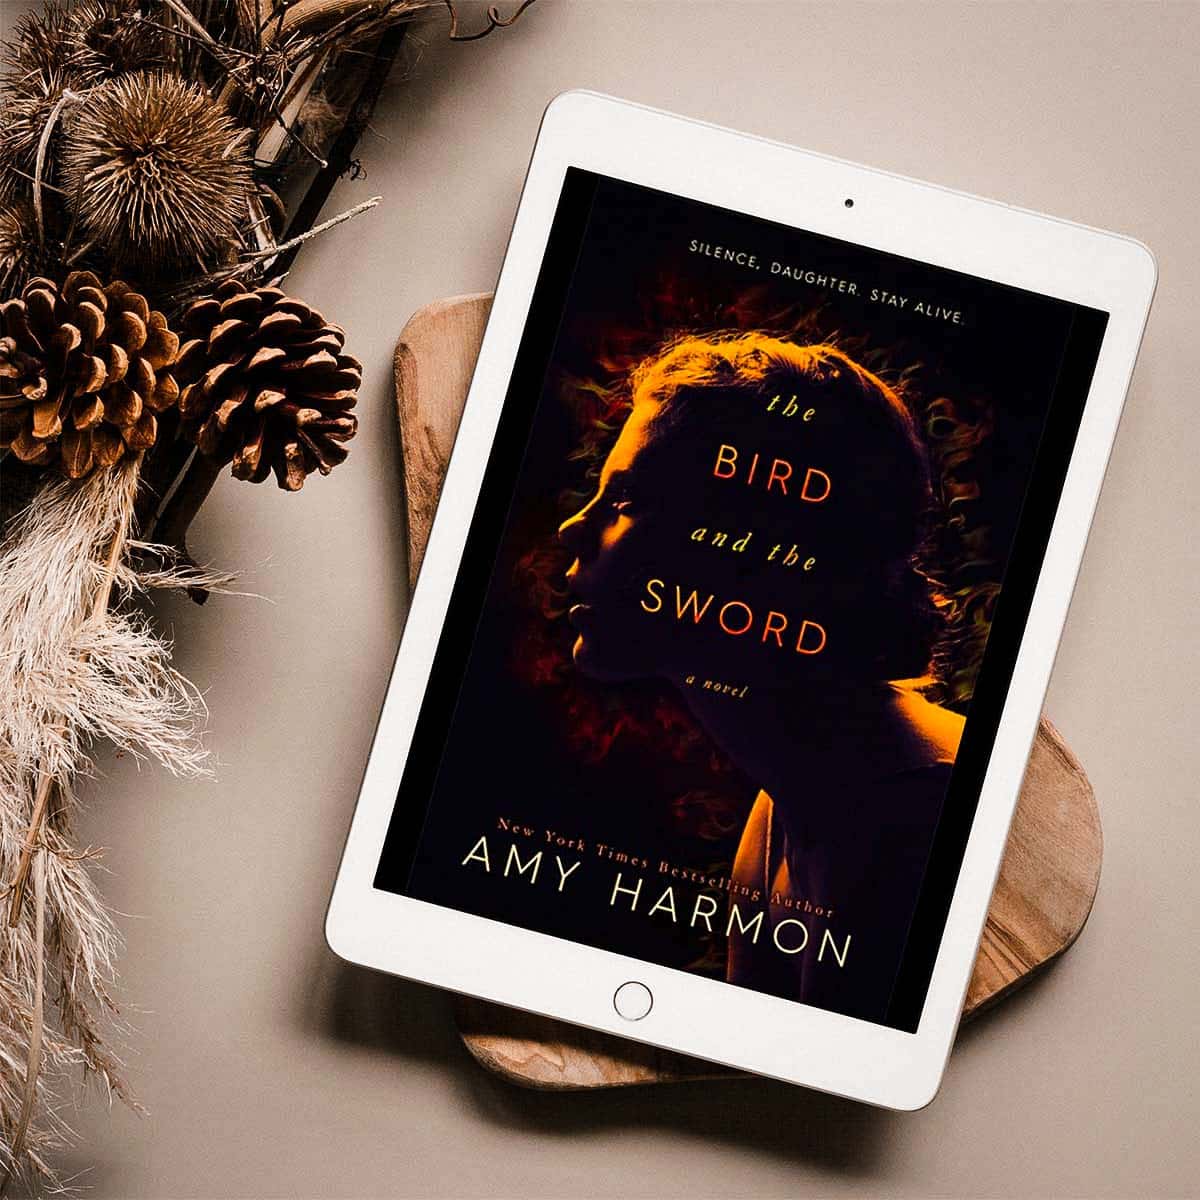 The Bird and the Sword by Amy Harmon is a brilliantly crafted, enchanting, and captivating fantasy romance about the power of words and finding your voice.